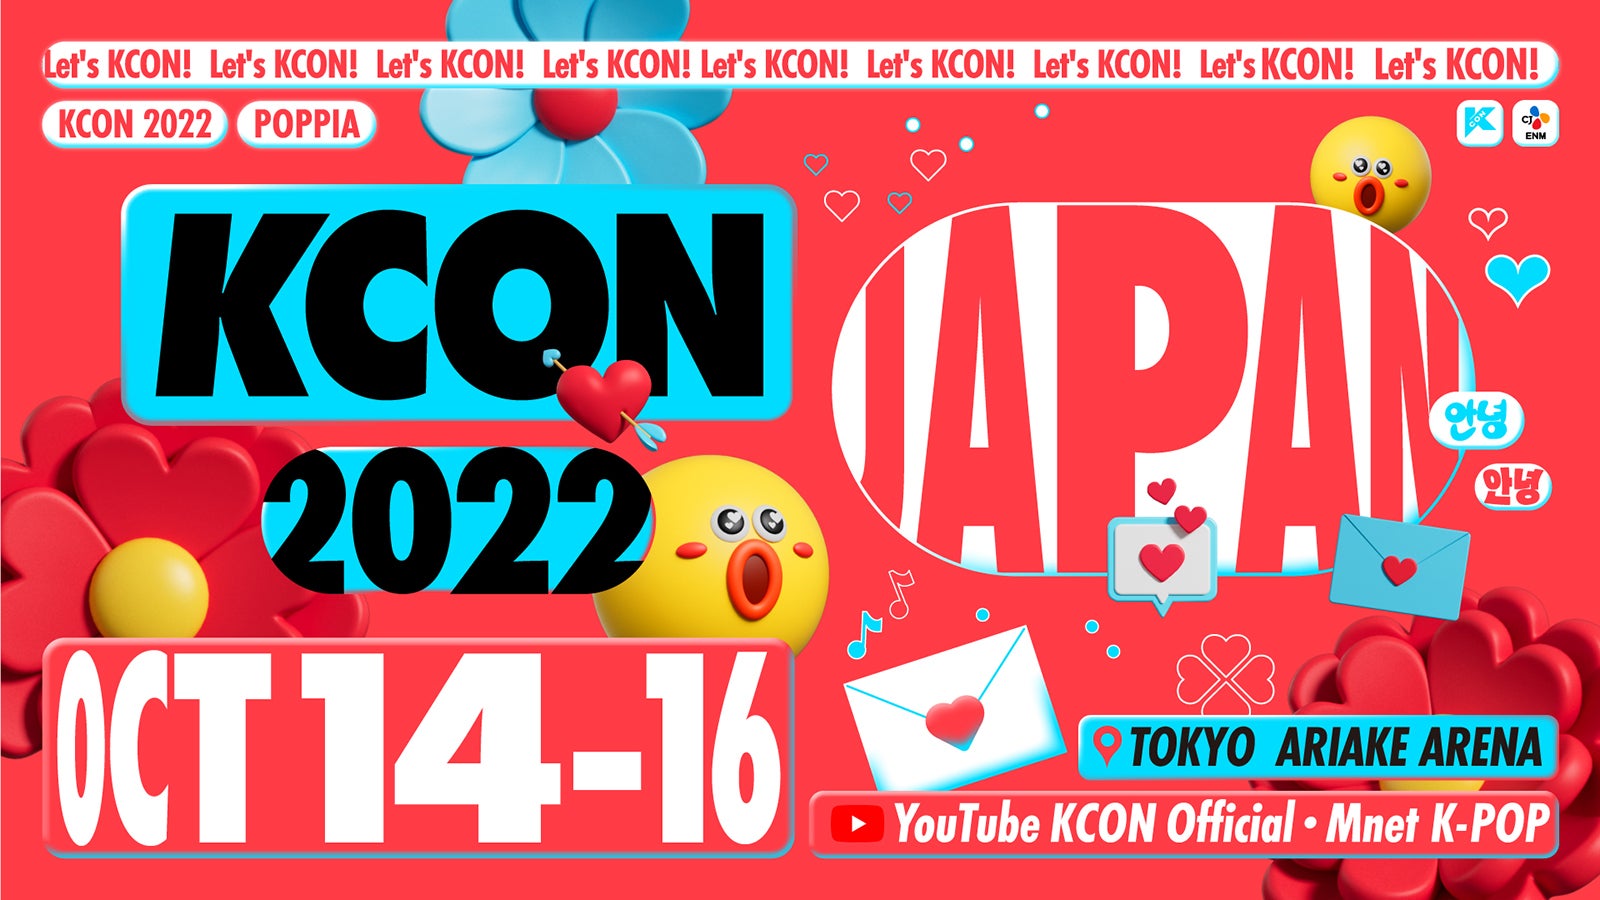 「KCON 2022 JAPAN」メインカット （C）CJ ENM Co., Ltd, All Rights Reserved